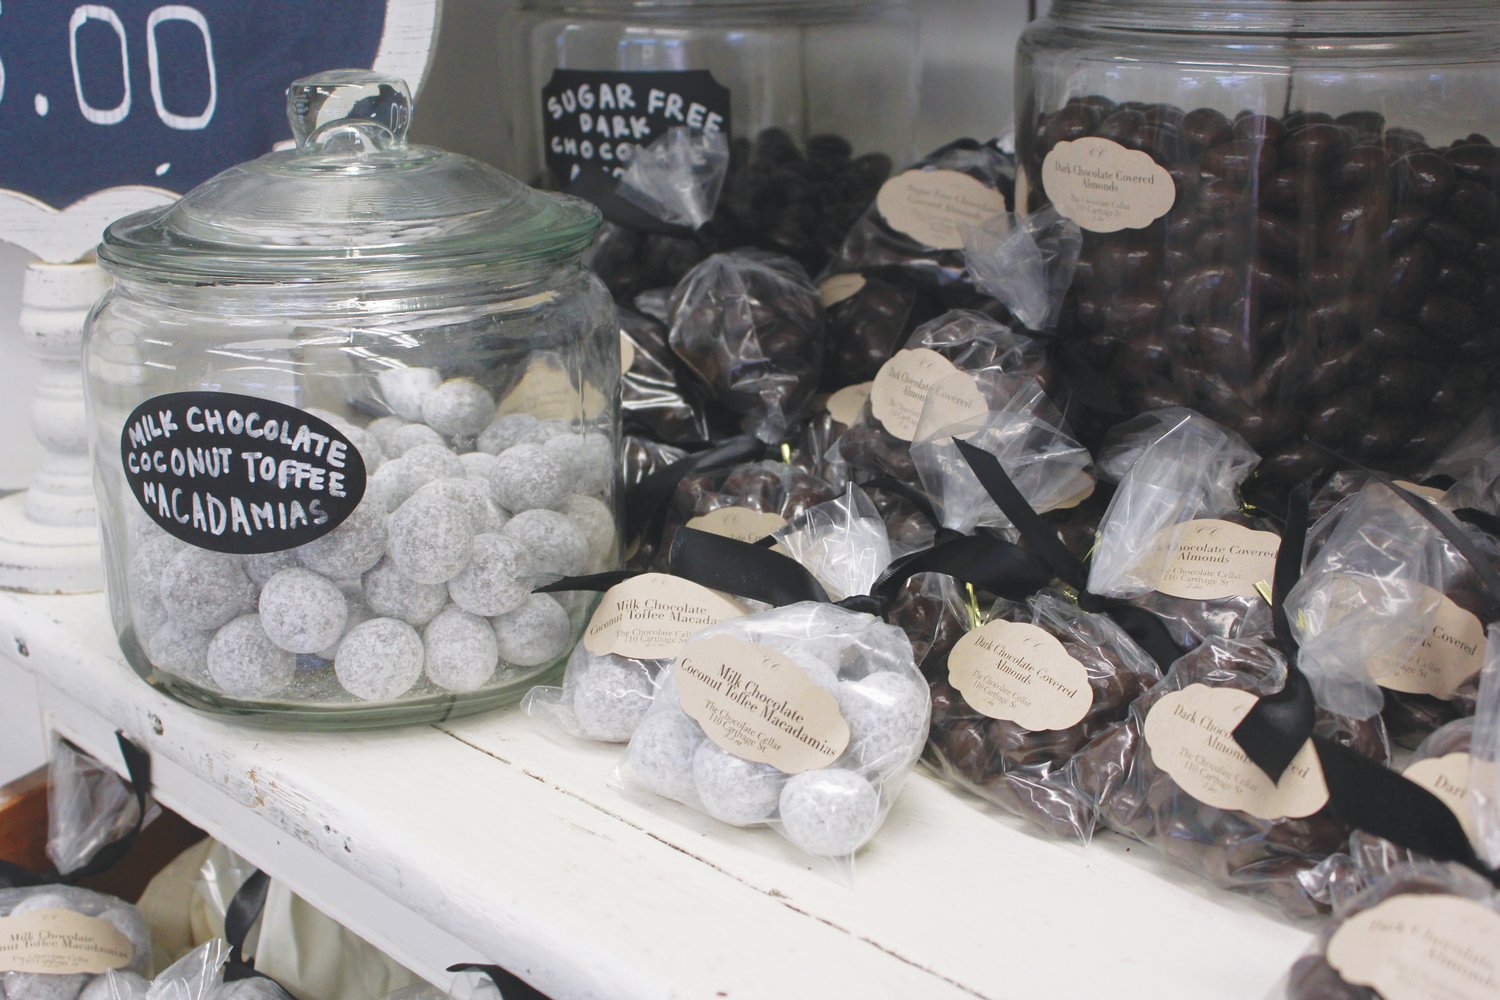 Chocolate covered nuts of various kinds line the shelves inside Chocolate Cellar Deux.